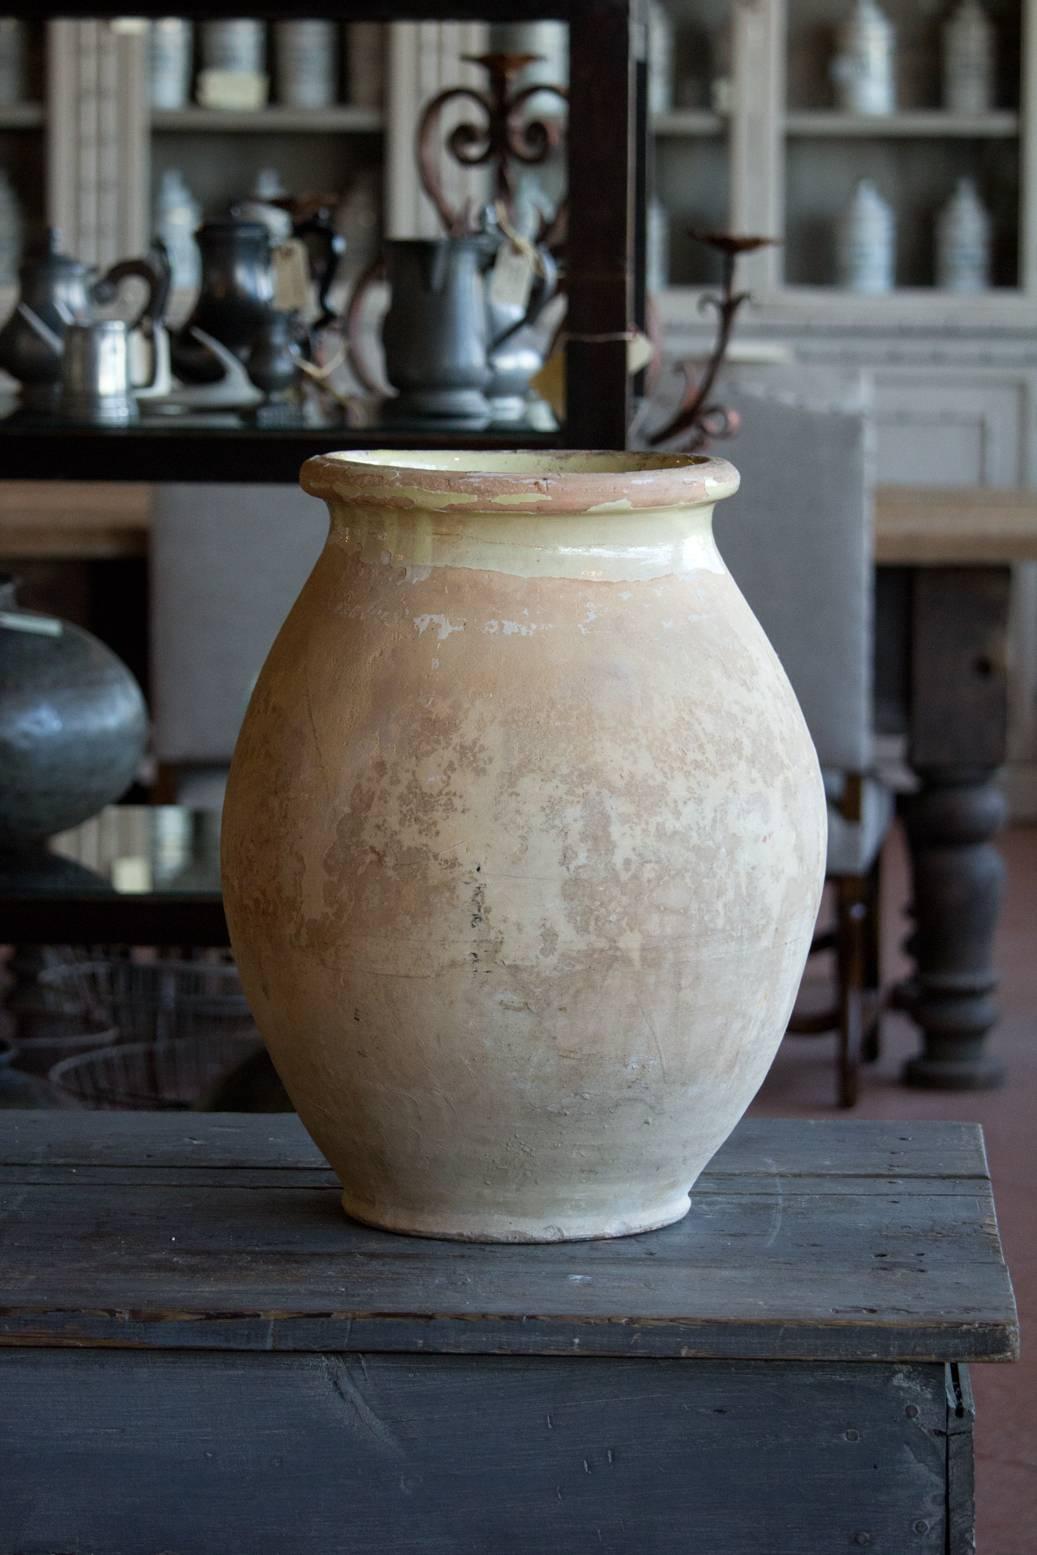 Antique Provence terracotta oil jar with a glazed interior and rim, from the Biot region of Southern France. Beautiful texture and patina.